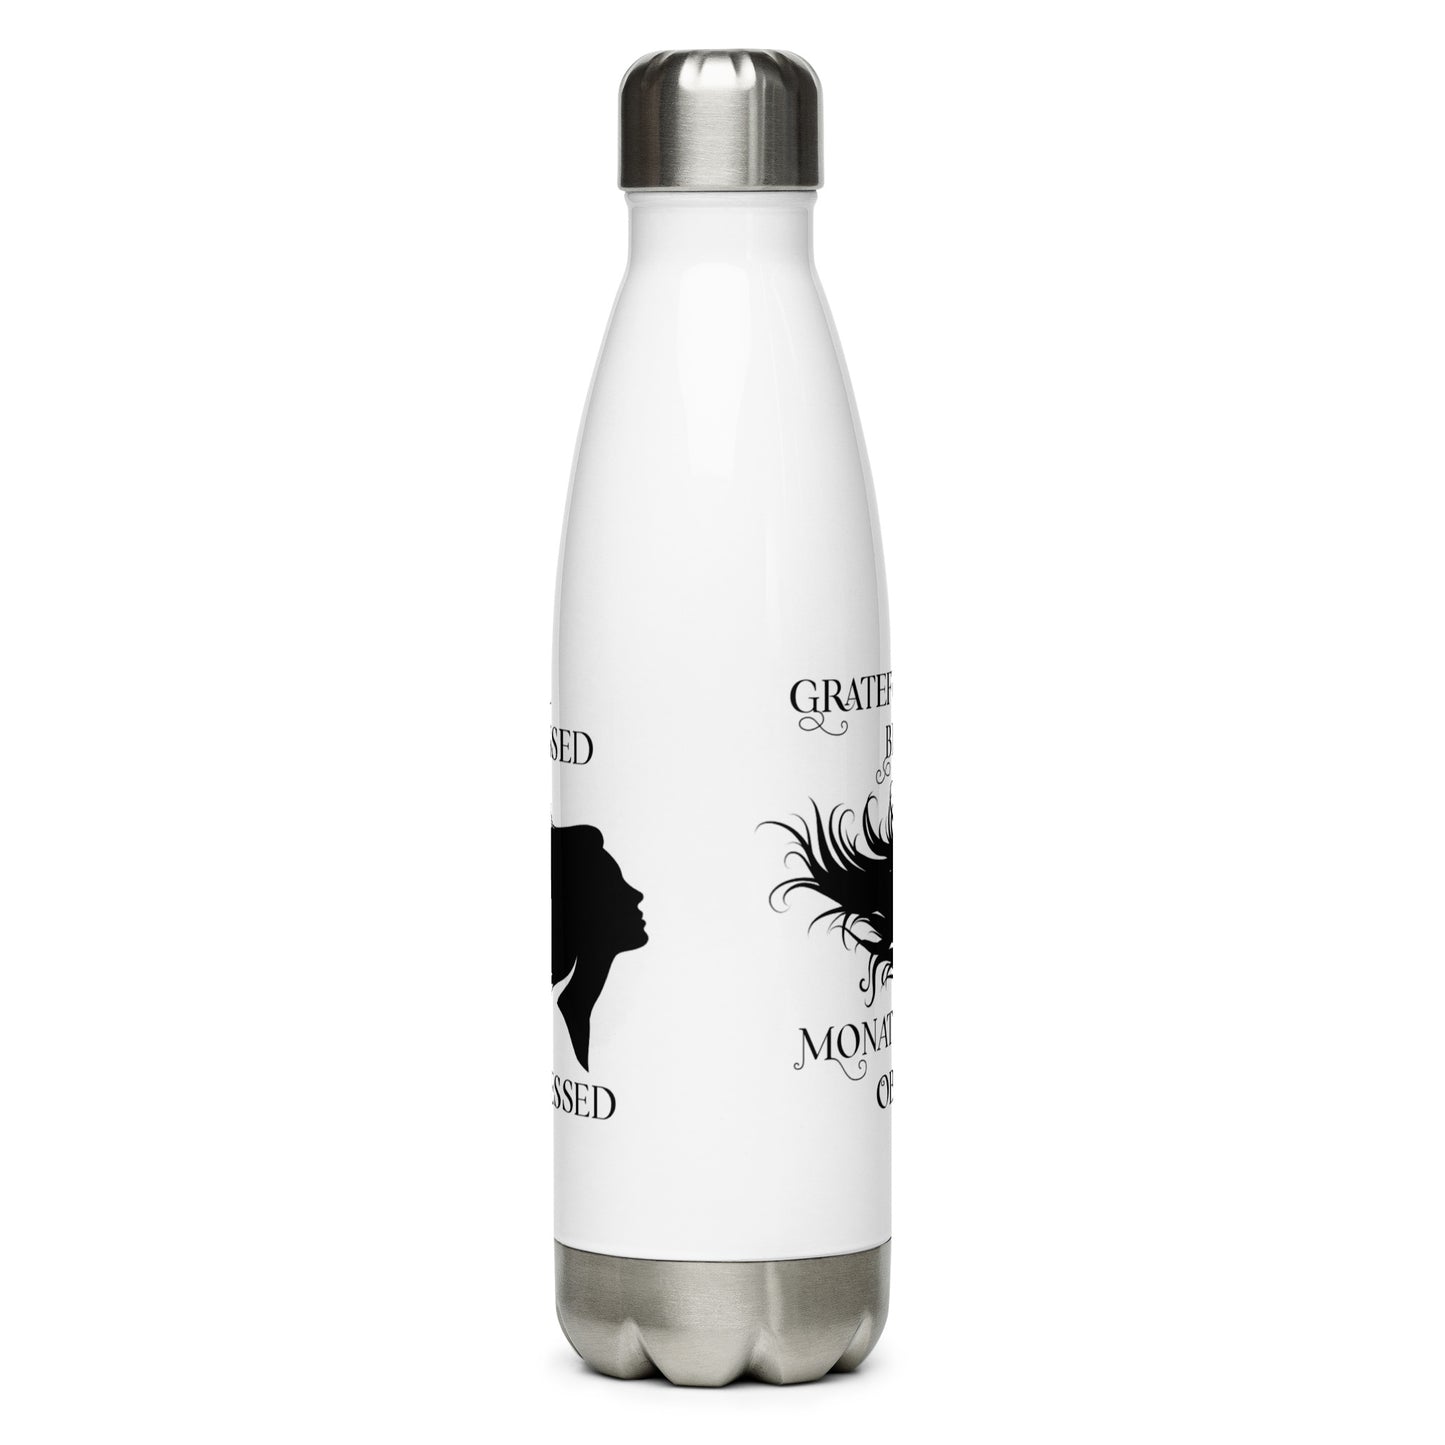 Grateful Blessed Monat Obsessed Stainless Thermos Bottle